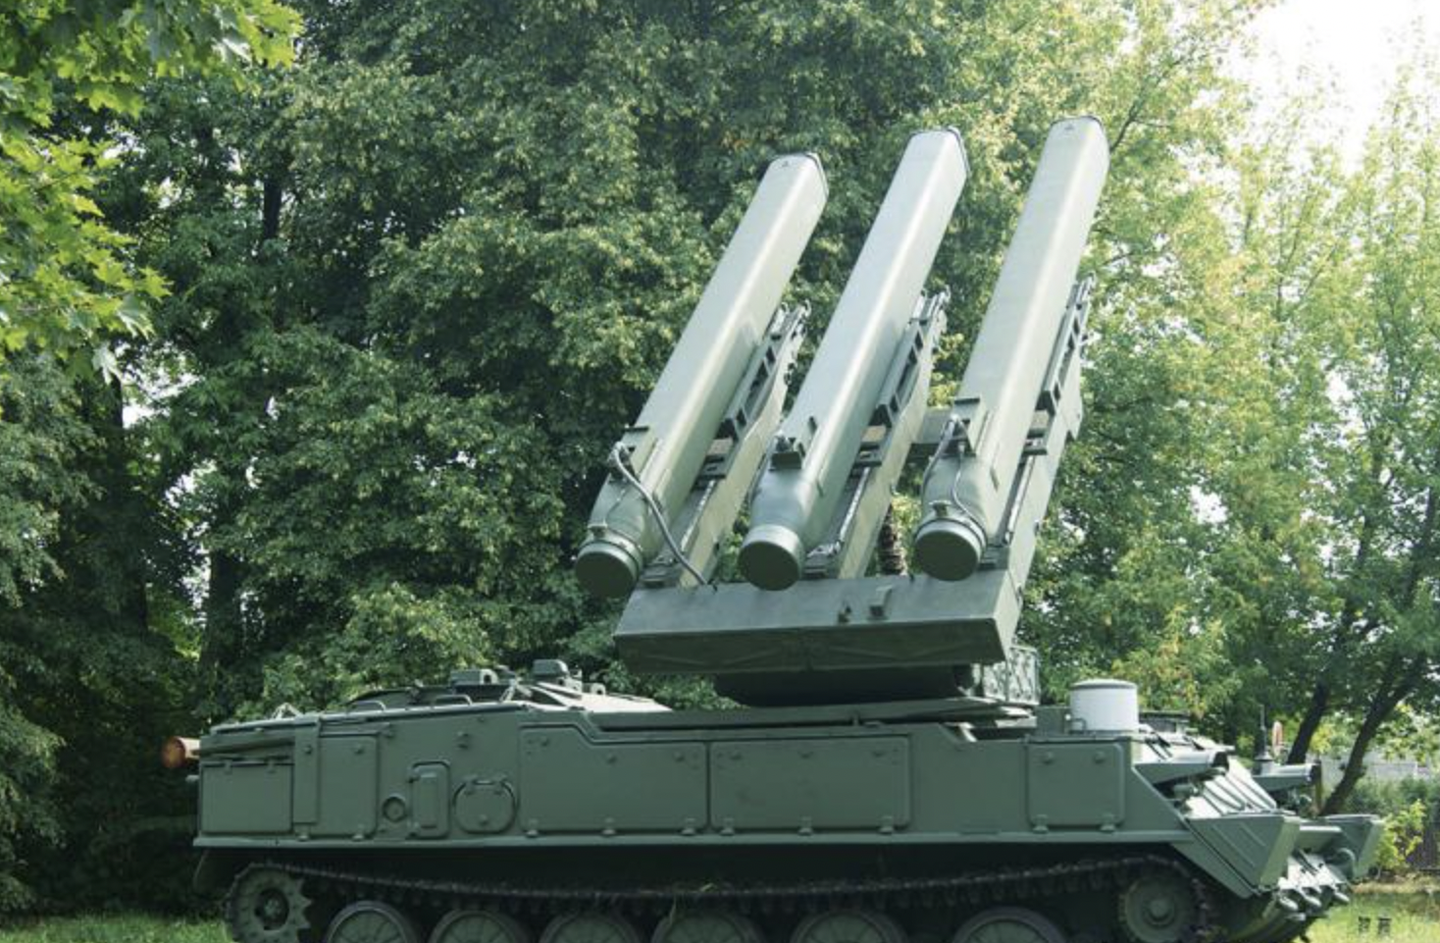 Adaptation of the 2K12 Kub air defense system for RIM-162 ESSM anti-aircraft missiles, developed by Polish WZU, Poland, the Czech Republic Have Surplus Kub ADS, Which Can Be Used as Launchers for American Sea Sparrow Missiles for Ukraine, Defense Express